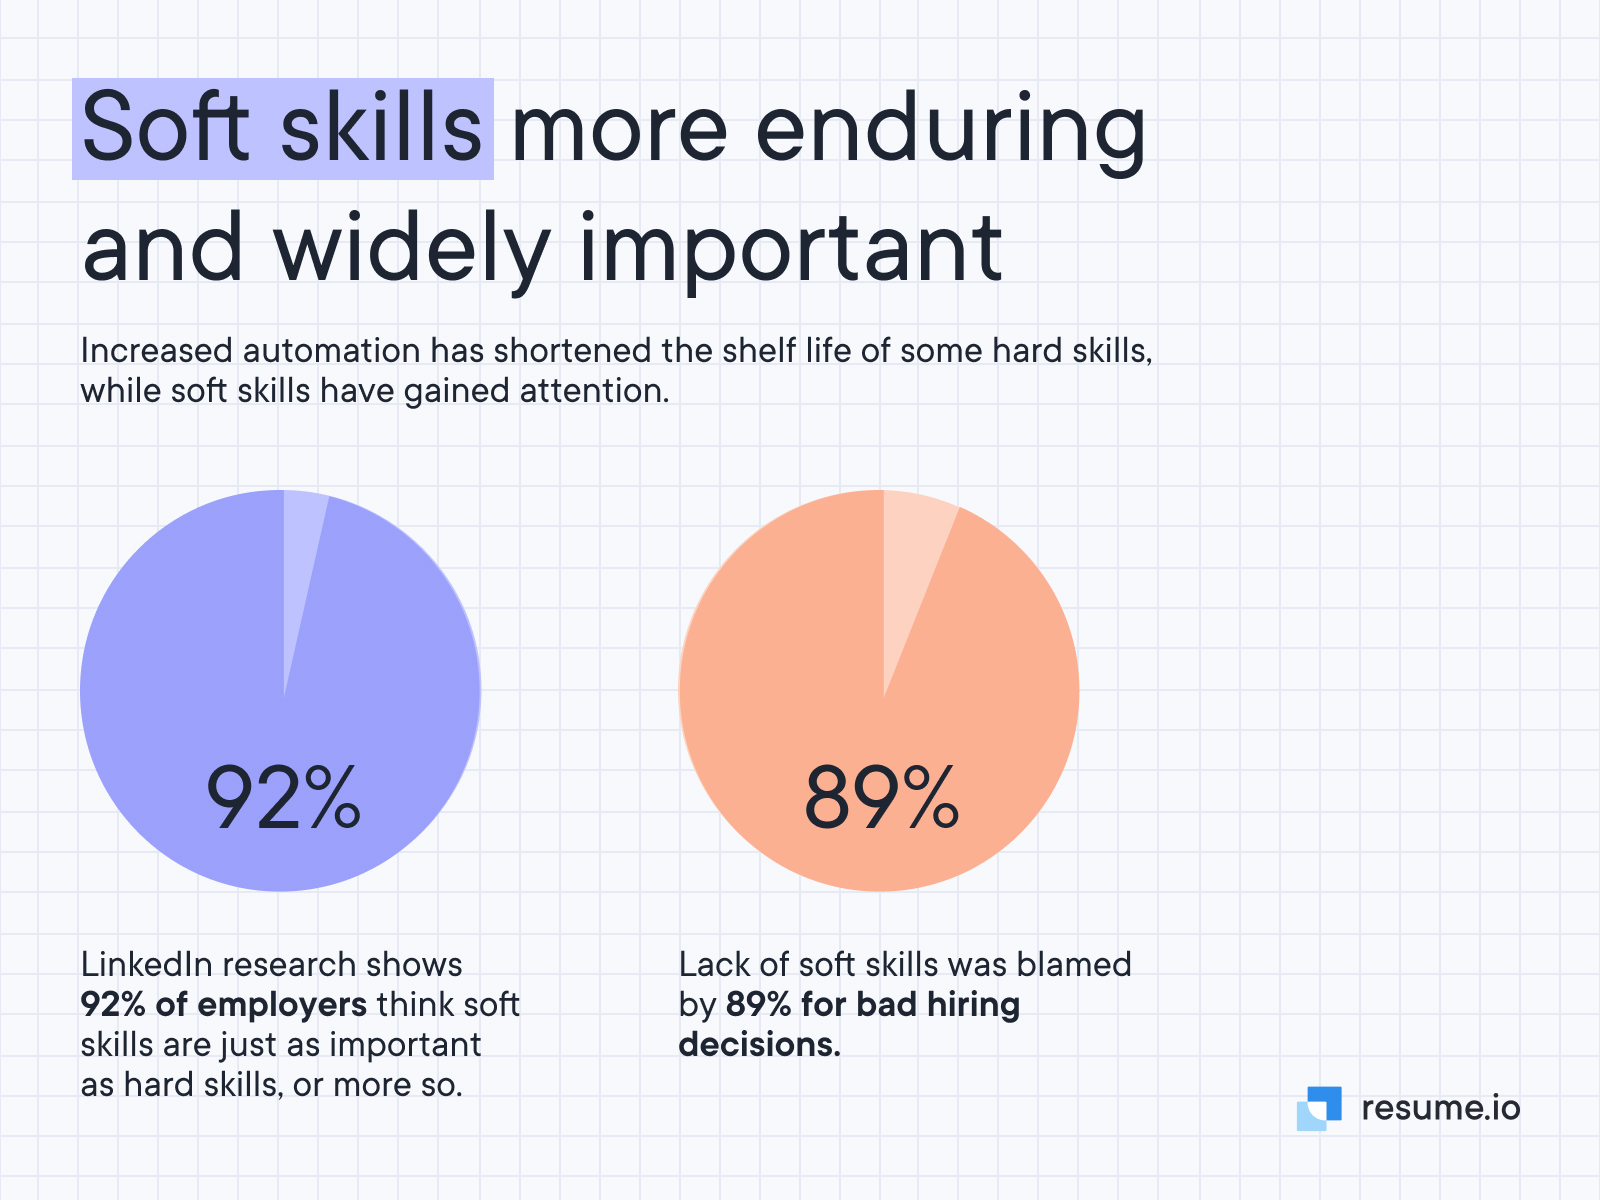 Soft skills more enduring and widely important